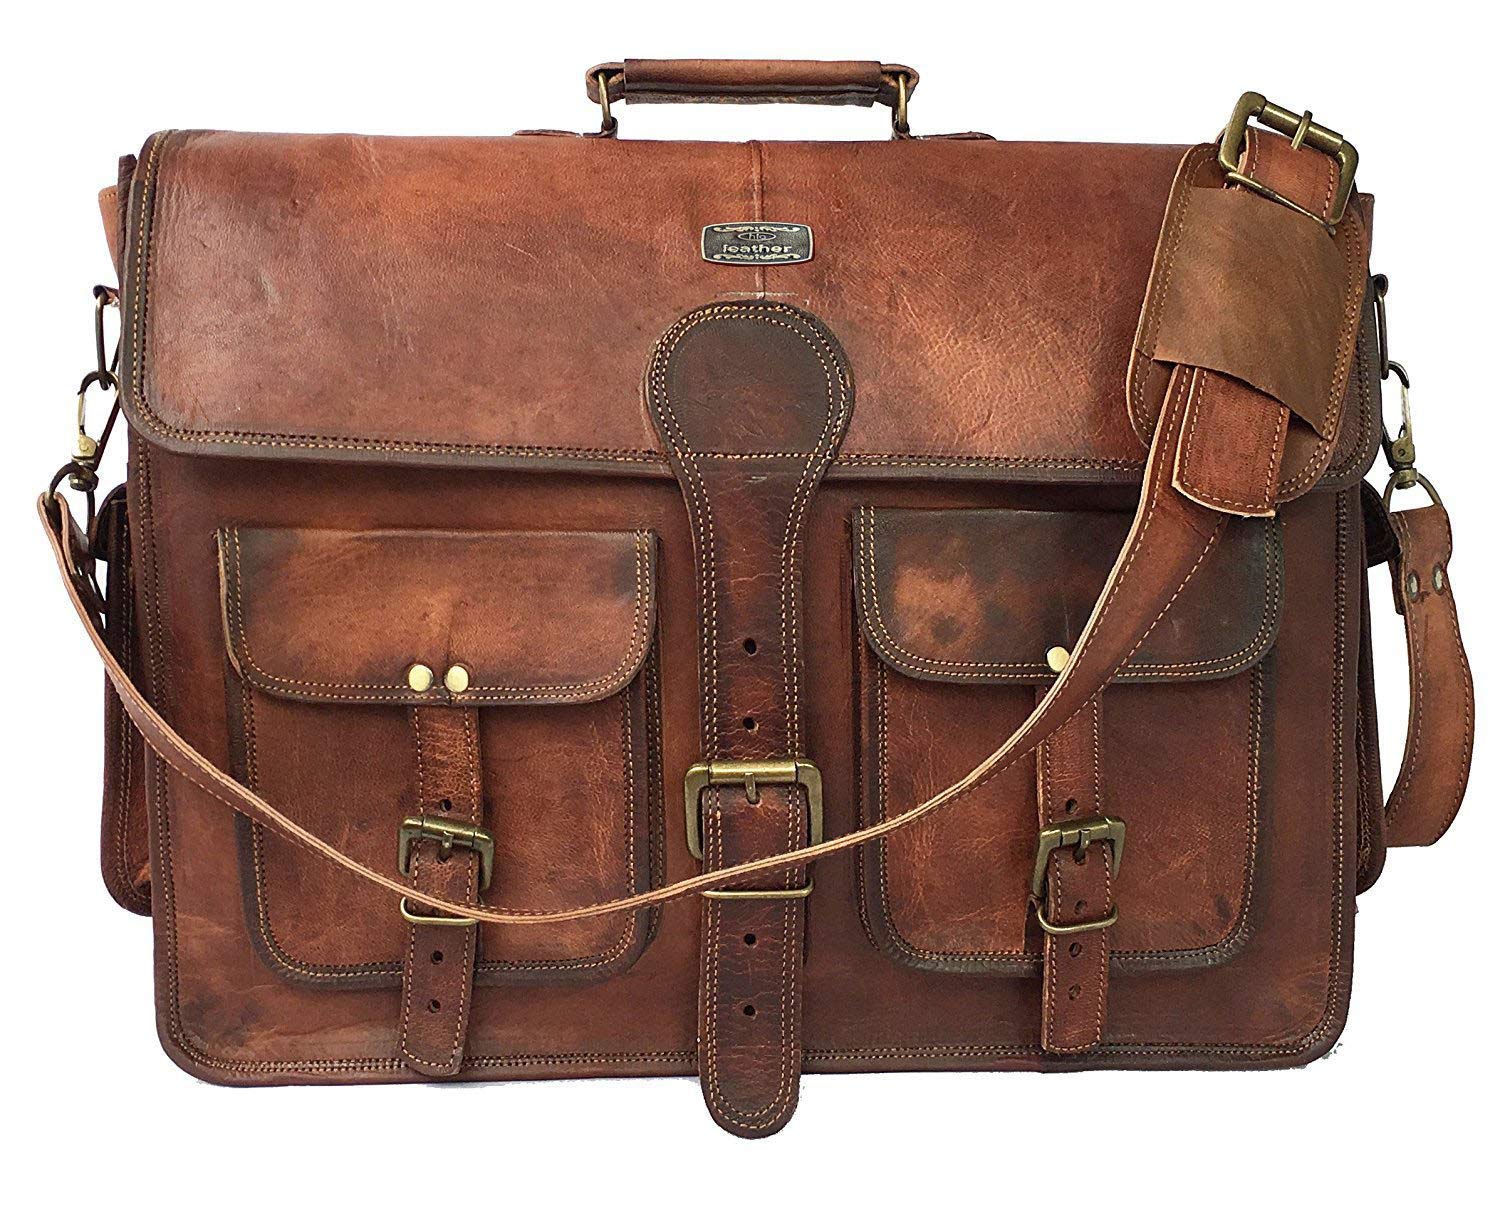 "Imported Vintage Handmade Leather Messenger Bag: Classic Style with Timeless Elegance"